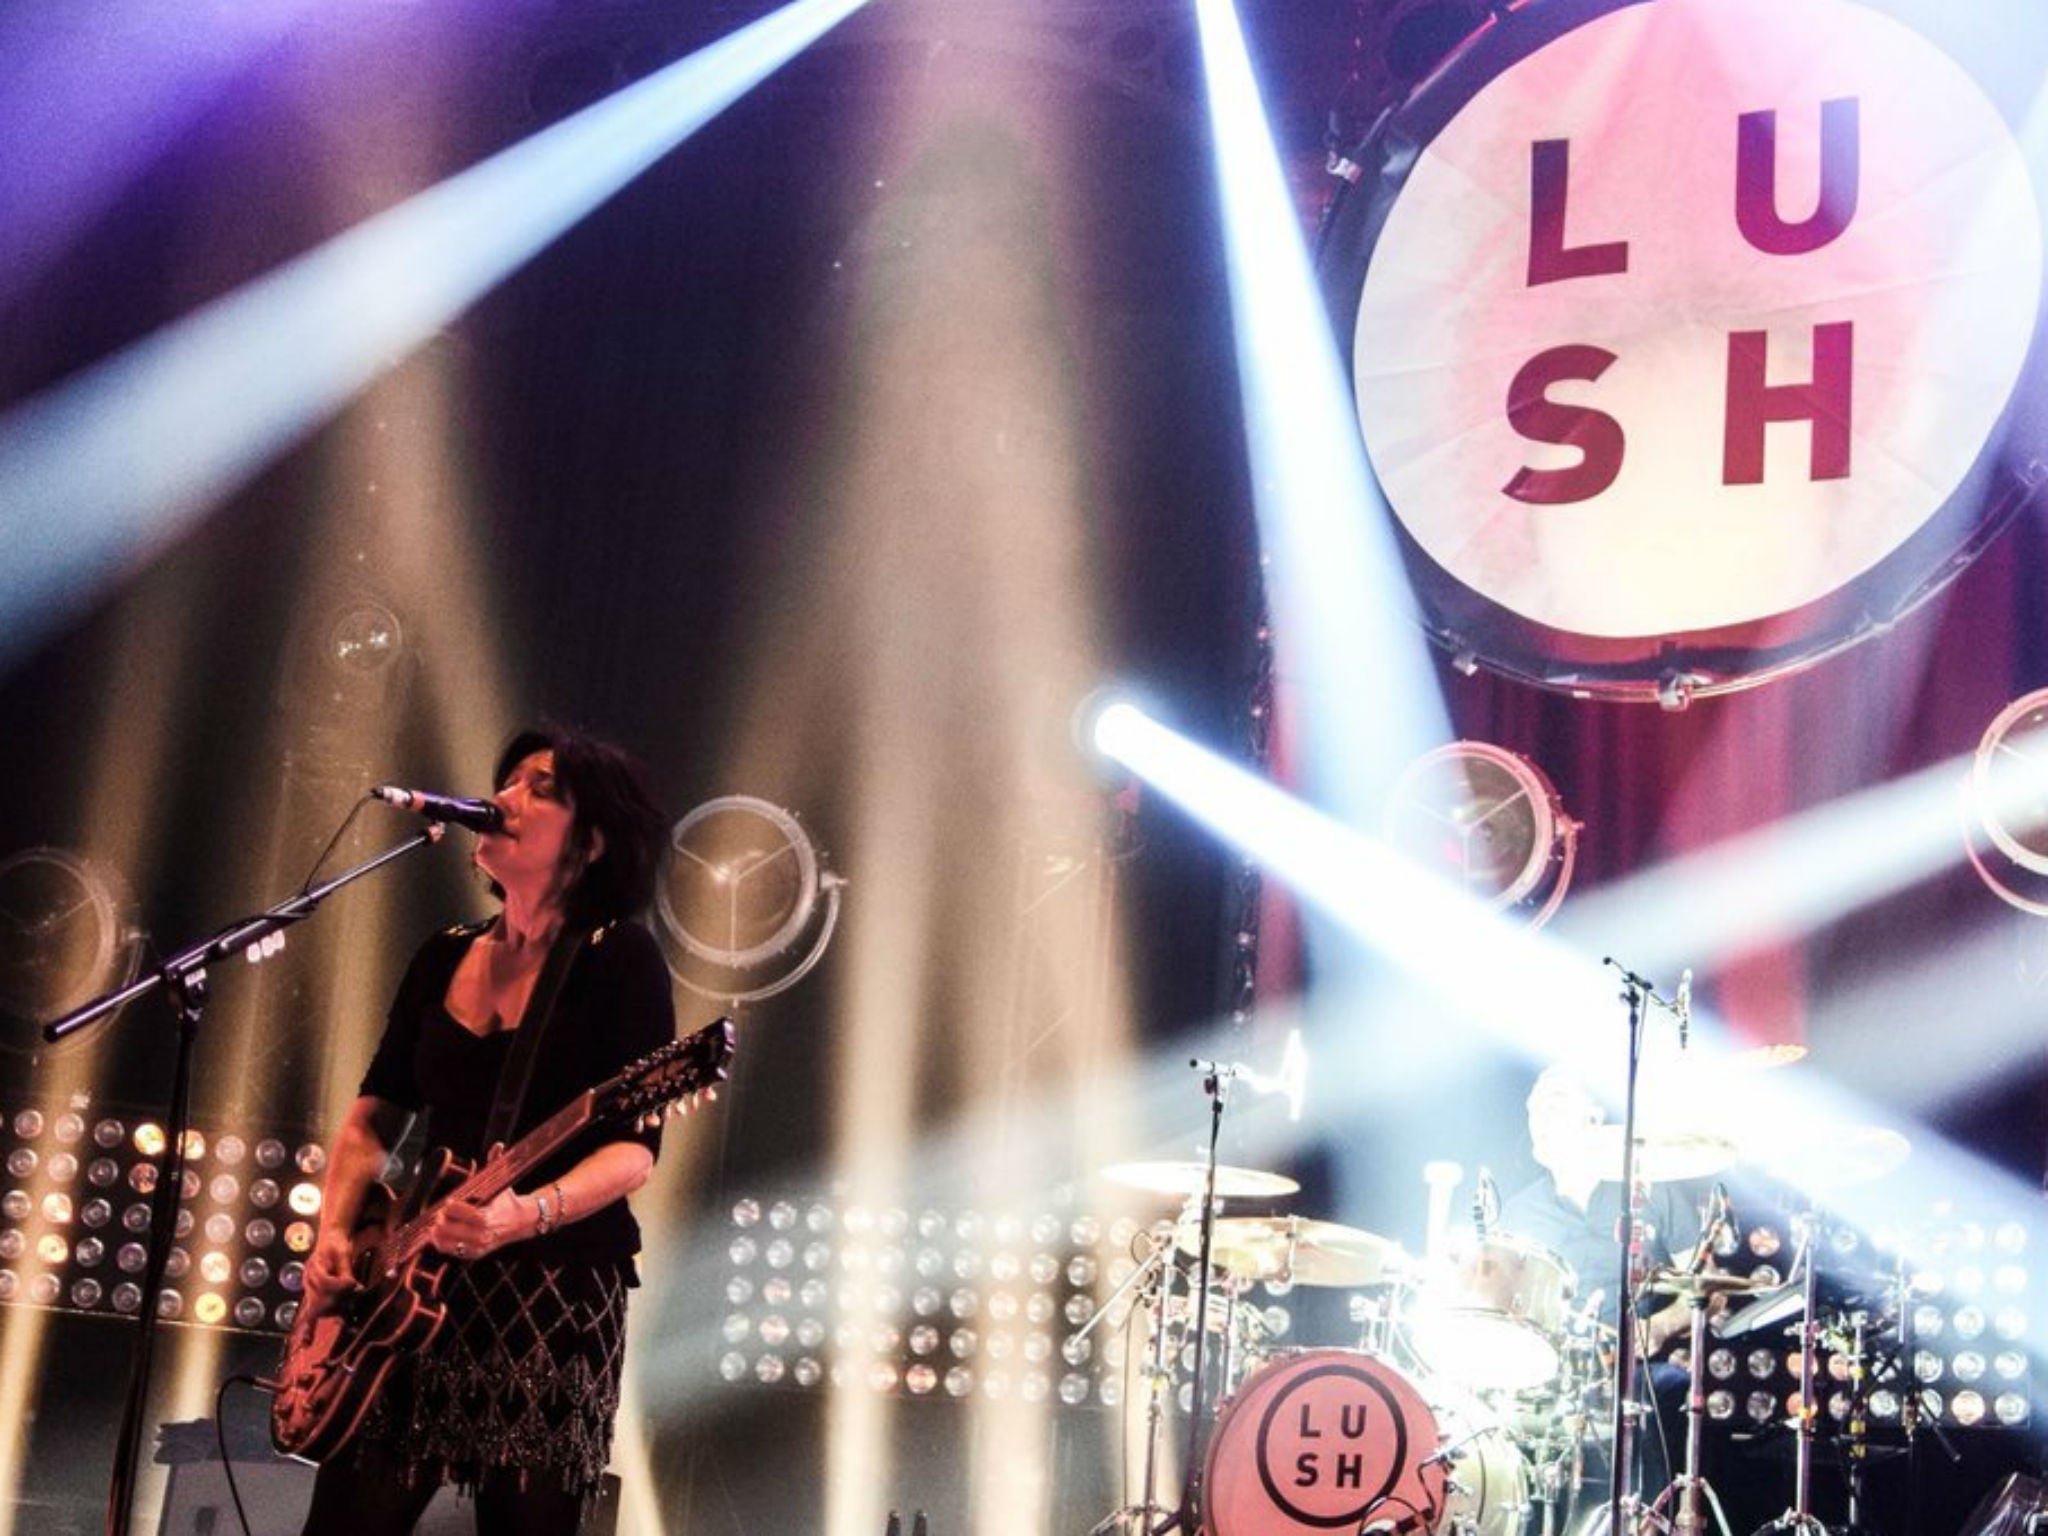 Lush perform at Roundhouse